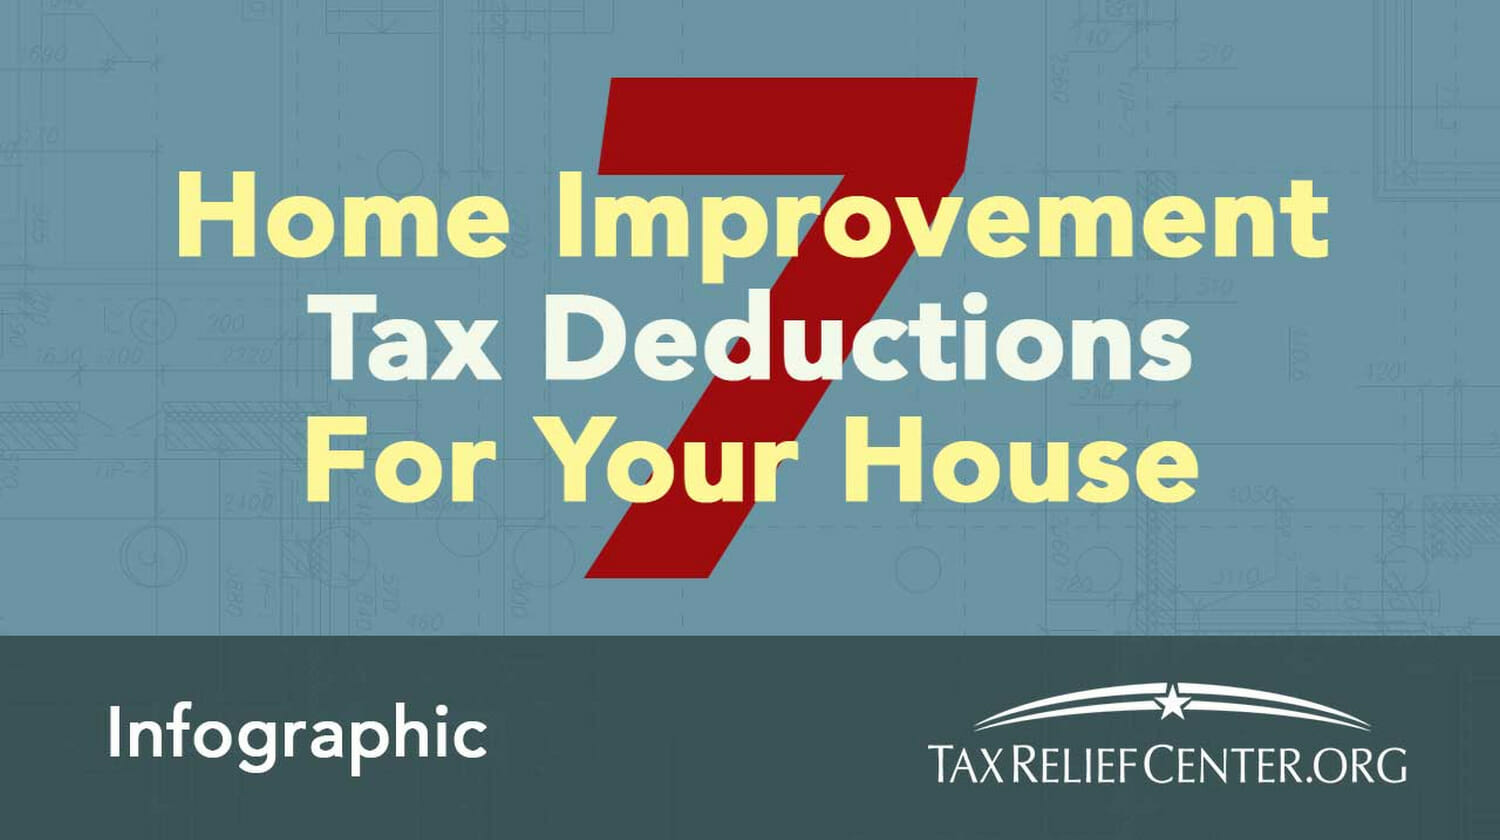 7 Home Improvement Tax Deductions INFOGRAPHIC 